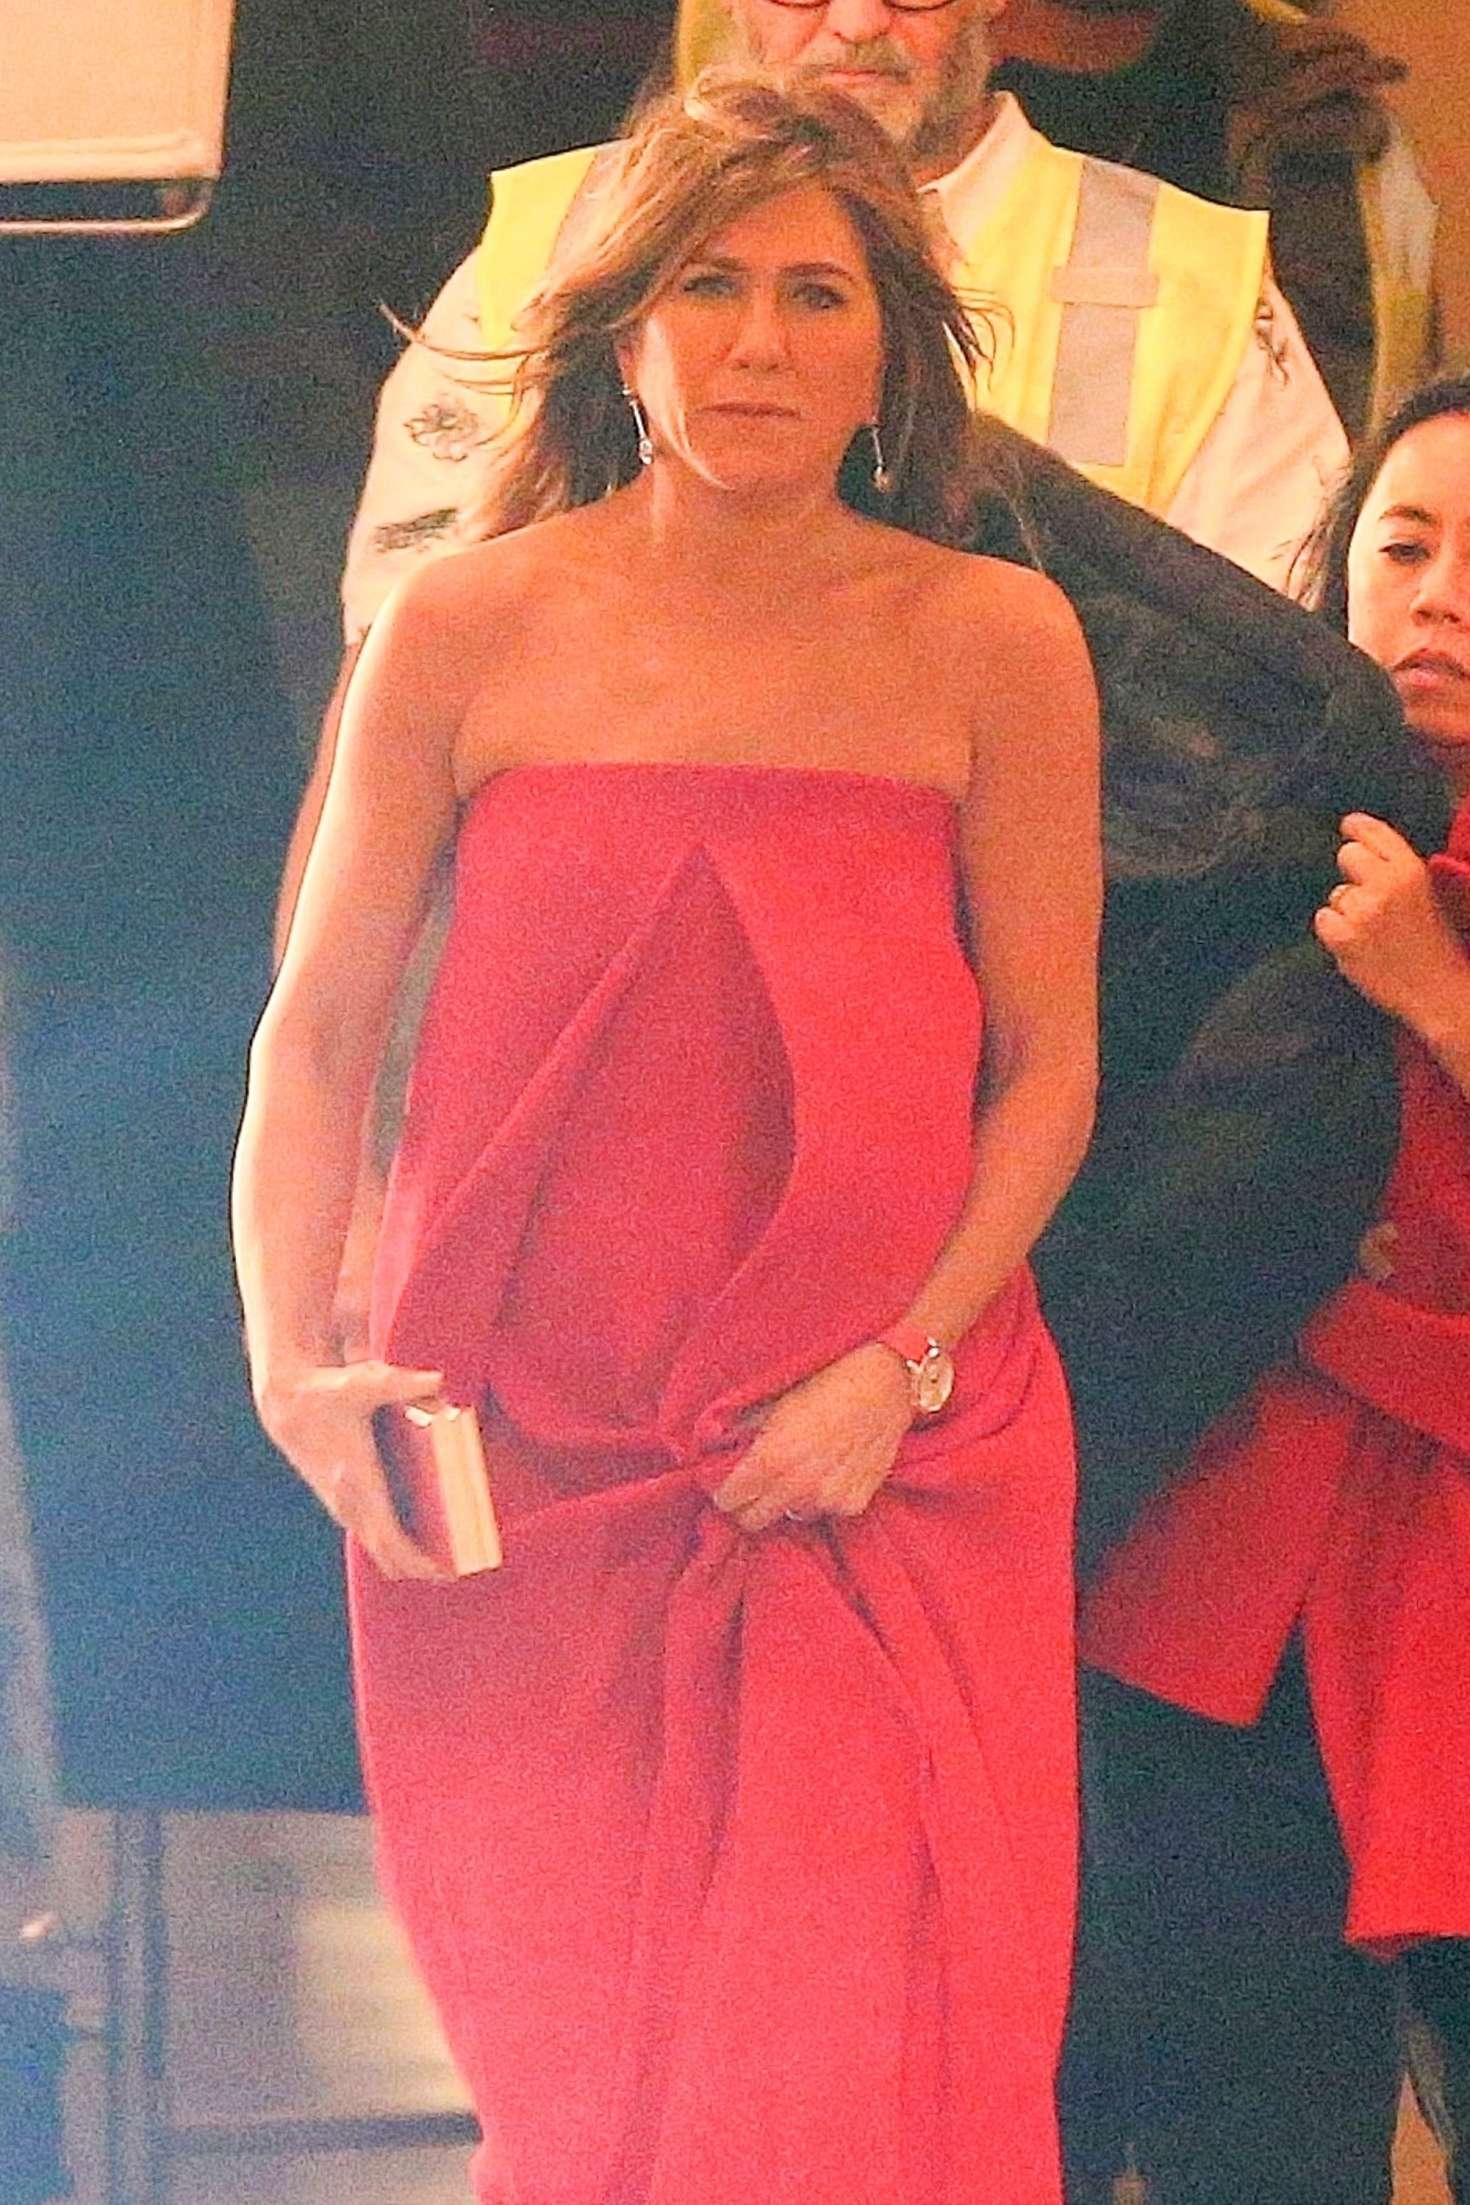 Jennifer Aniston â€“ On the set of new TV show â€˜Top Of The Morningâ€™ in Los Angeles